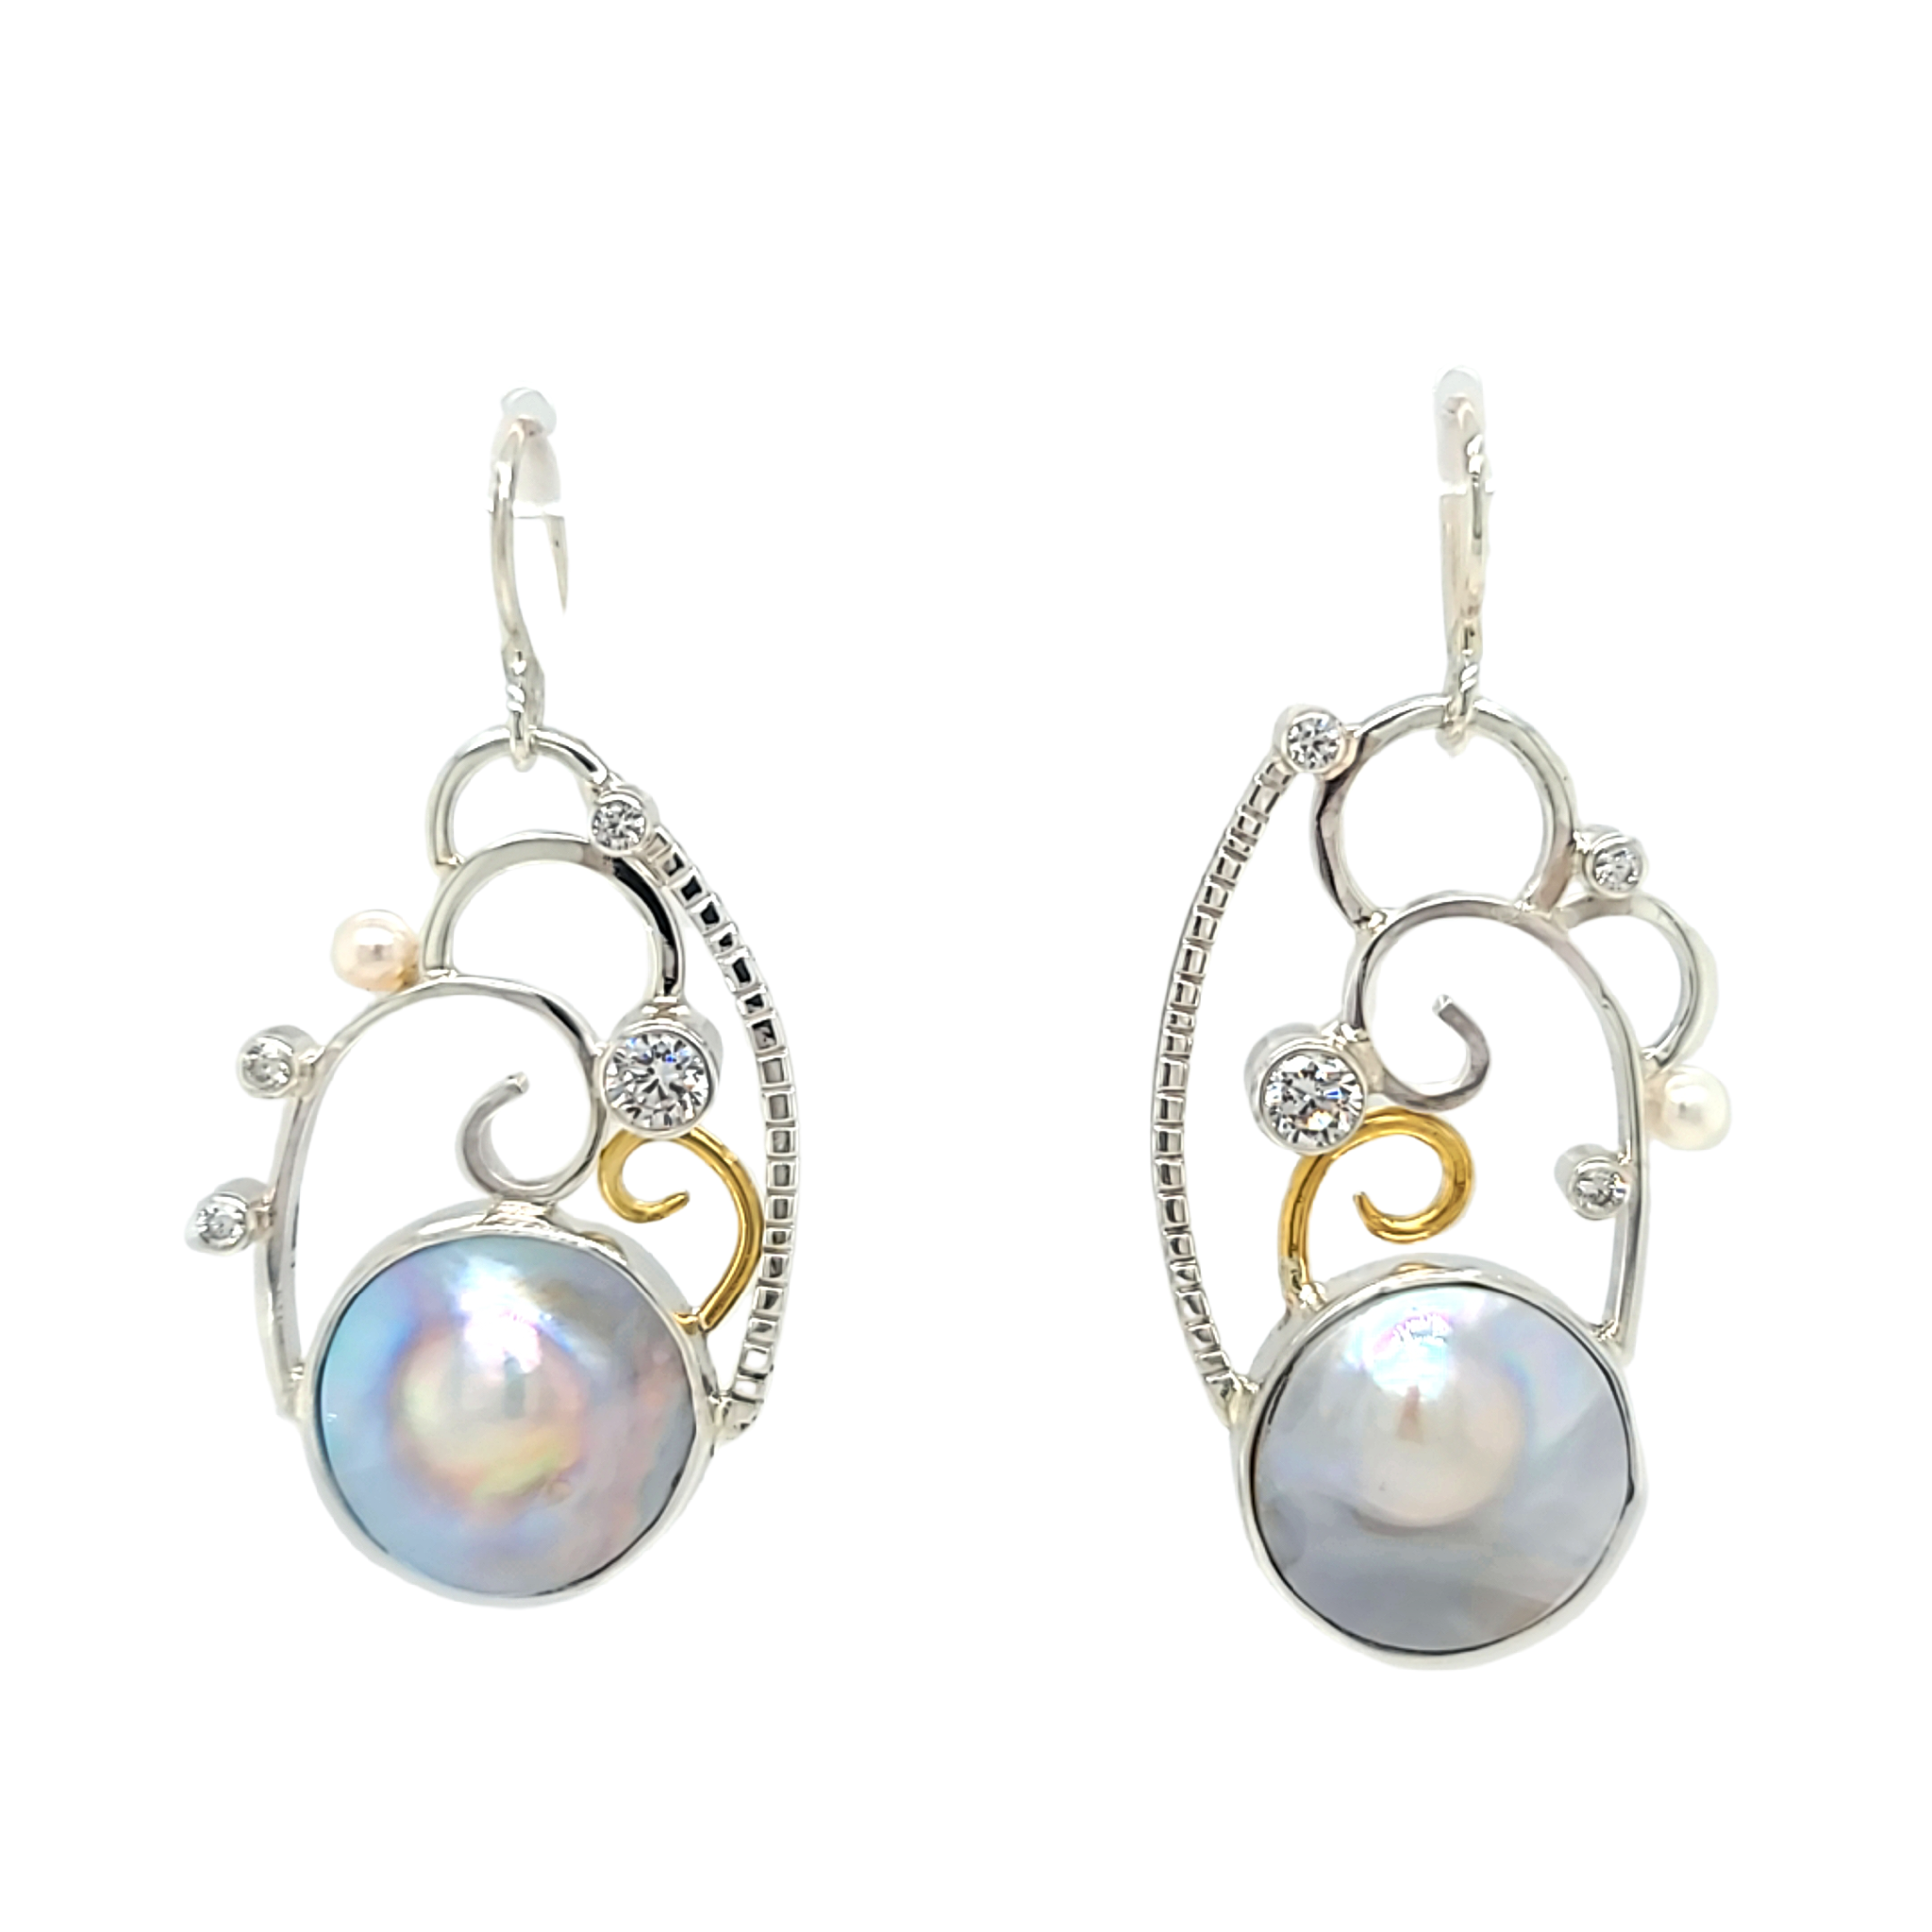 Mabe Pearl Earrings with 22k Accents